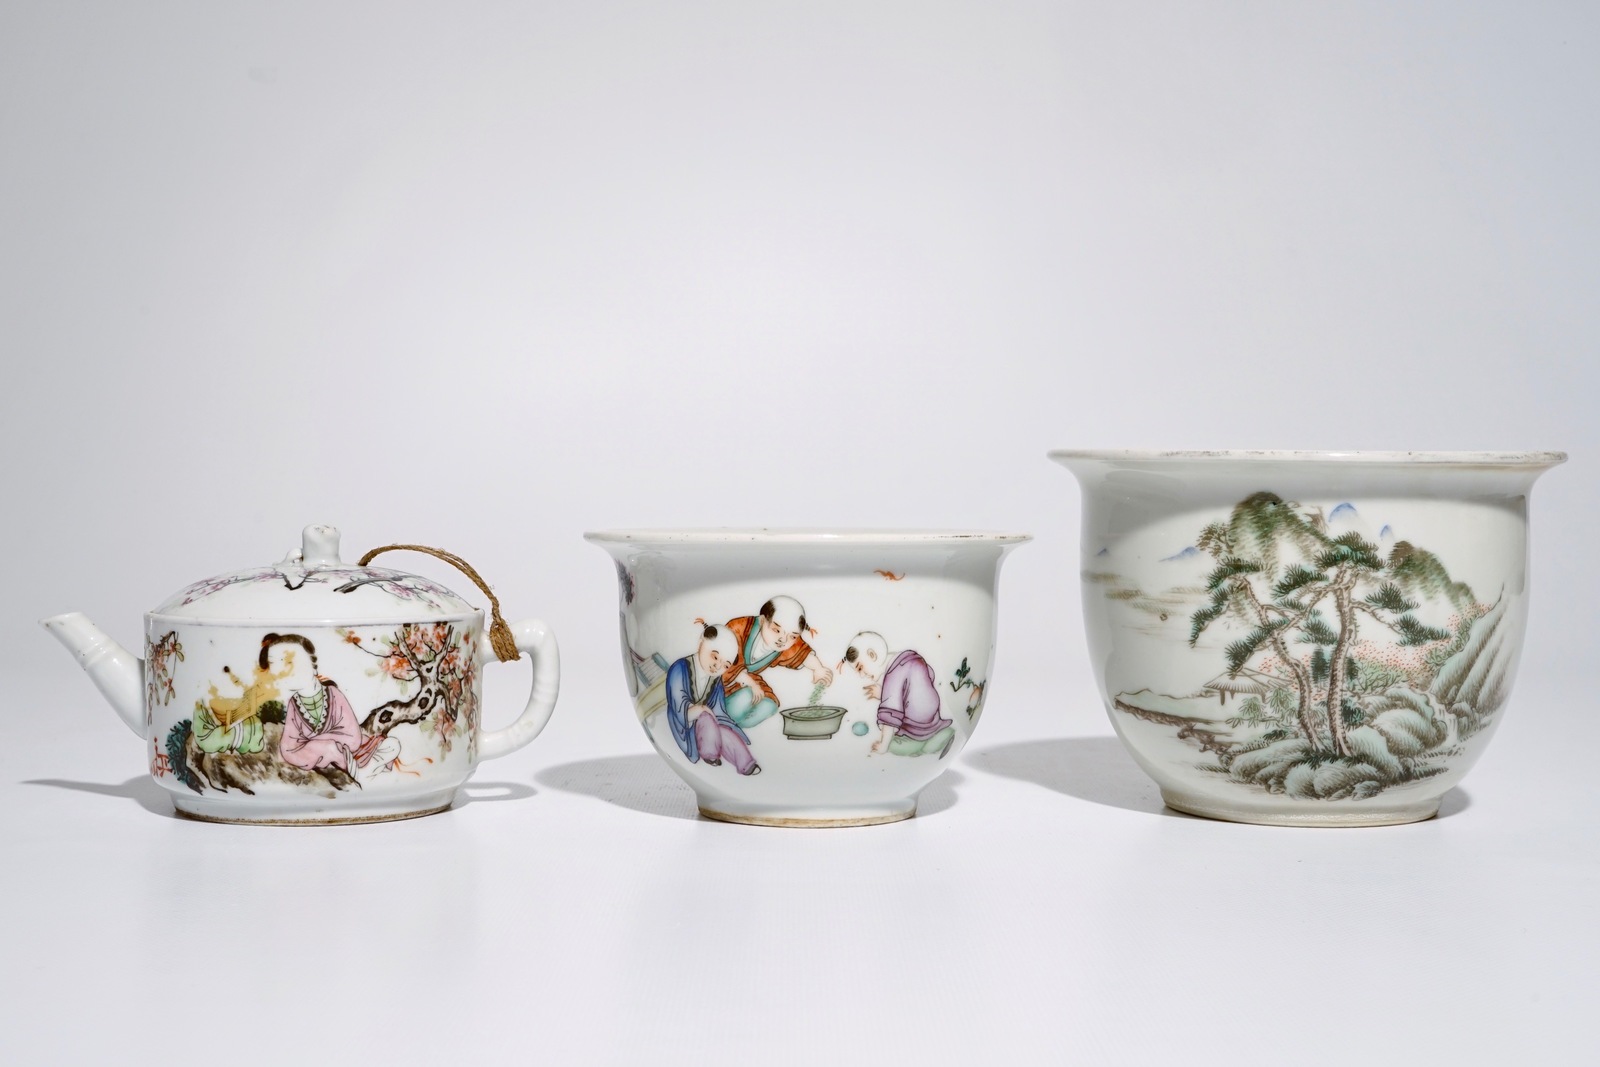 A varied lot of Chinese qianjiang cai porcelain, 19/20th C. Dia.: 17 cm - H.: 12 cm (largest bowl) - Image 4 of 9